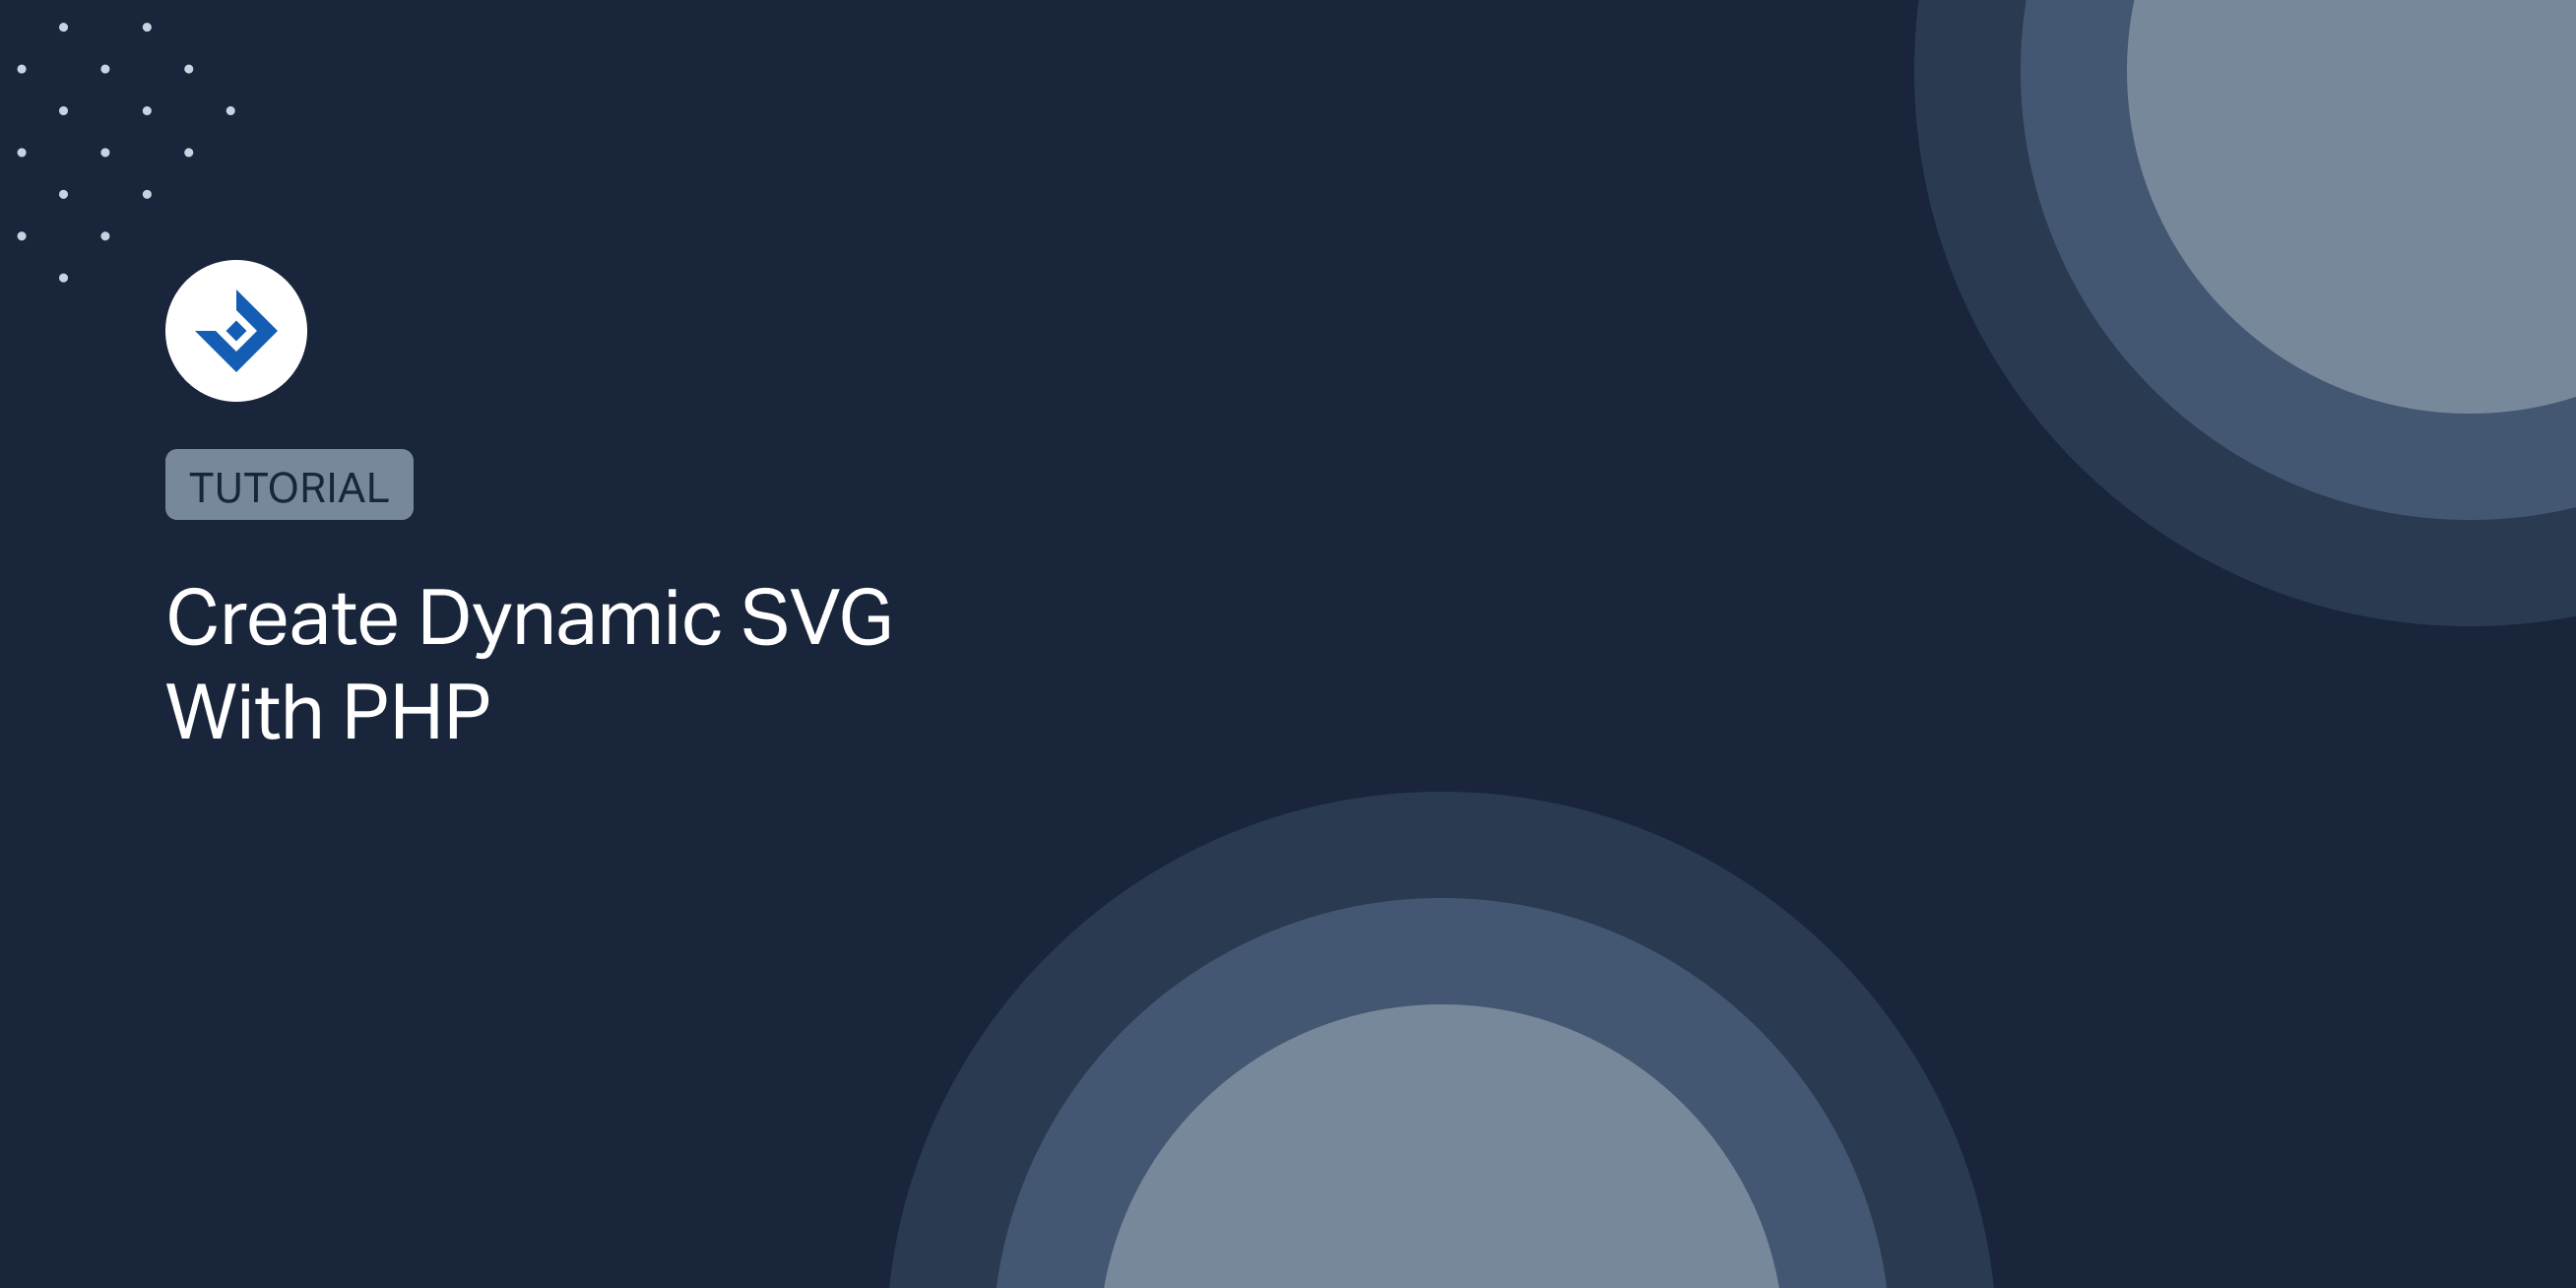 Create Dynamic SVG With PHP